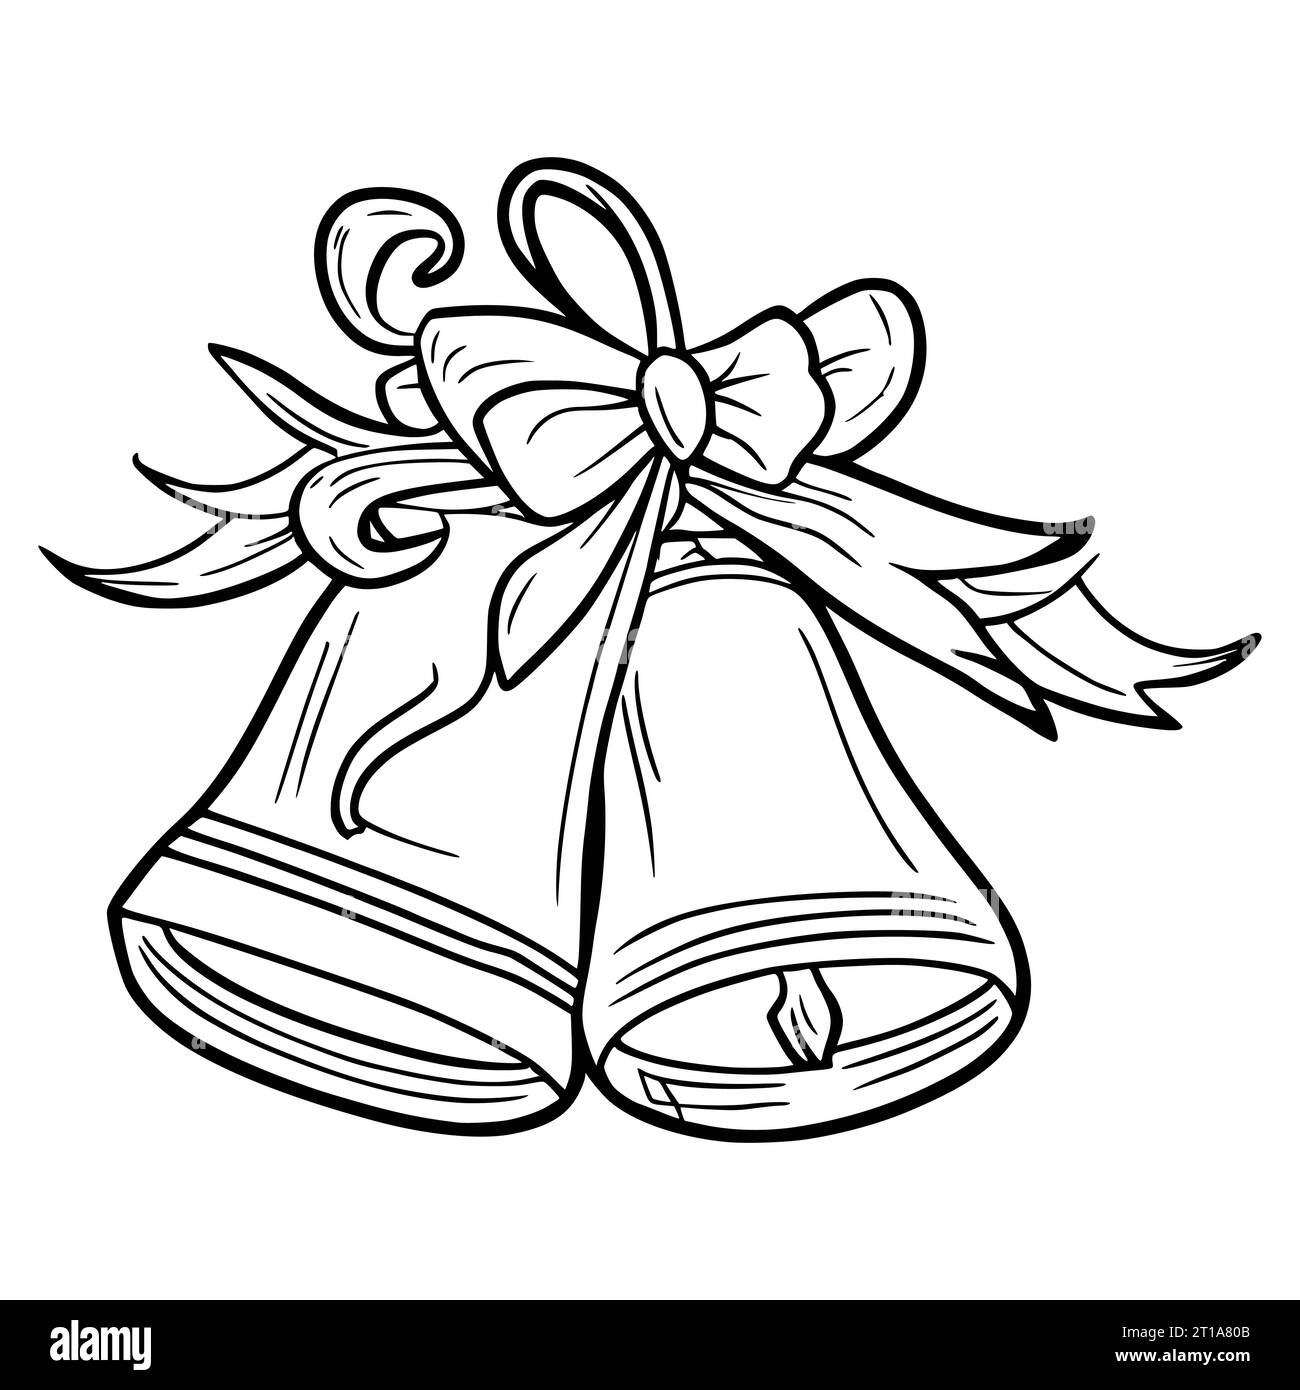 Printable christmas bells coloring pages hi